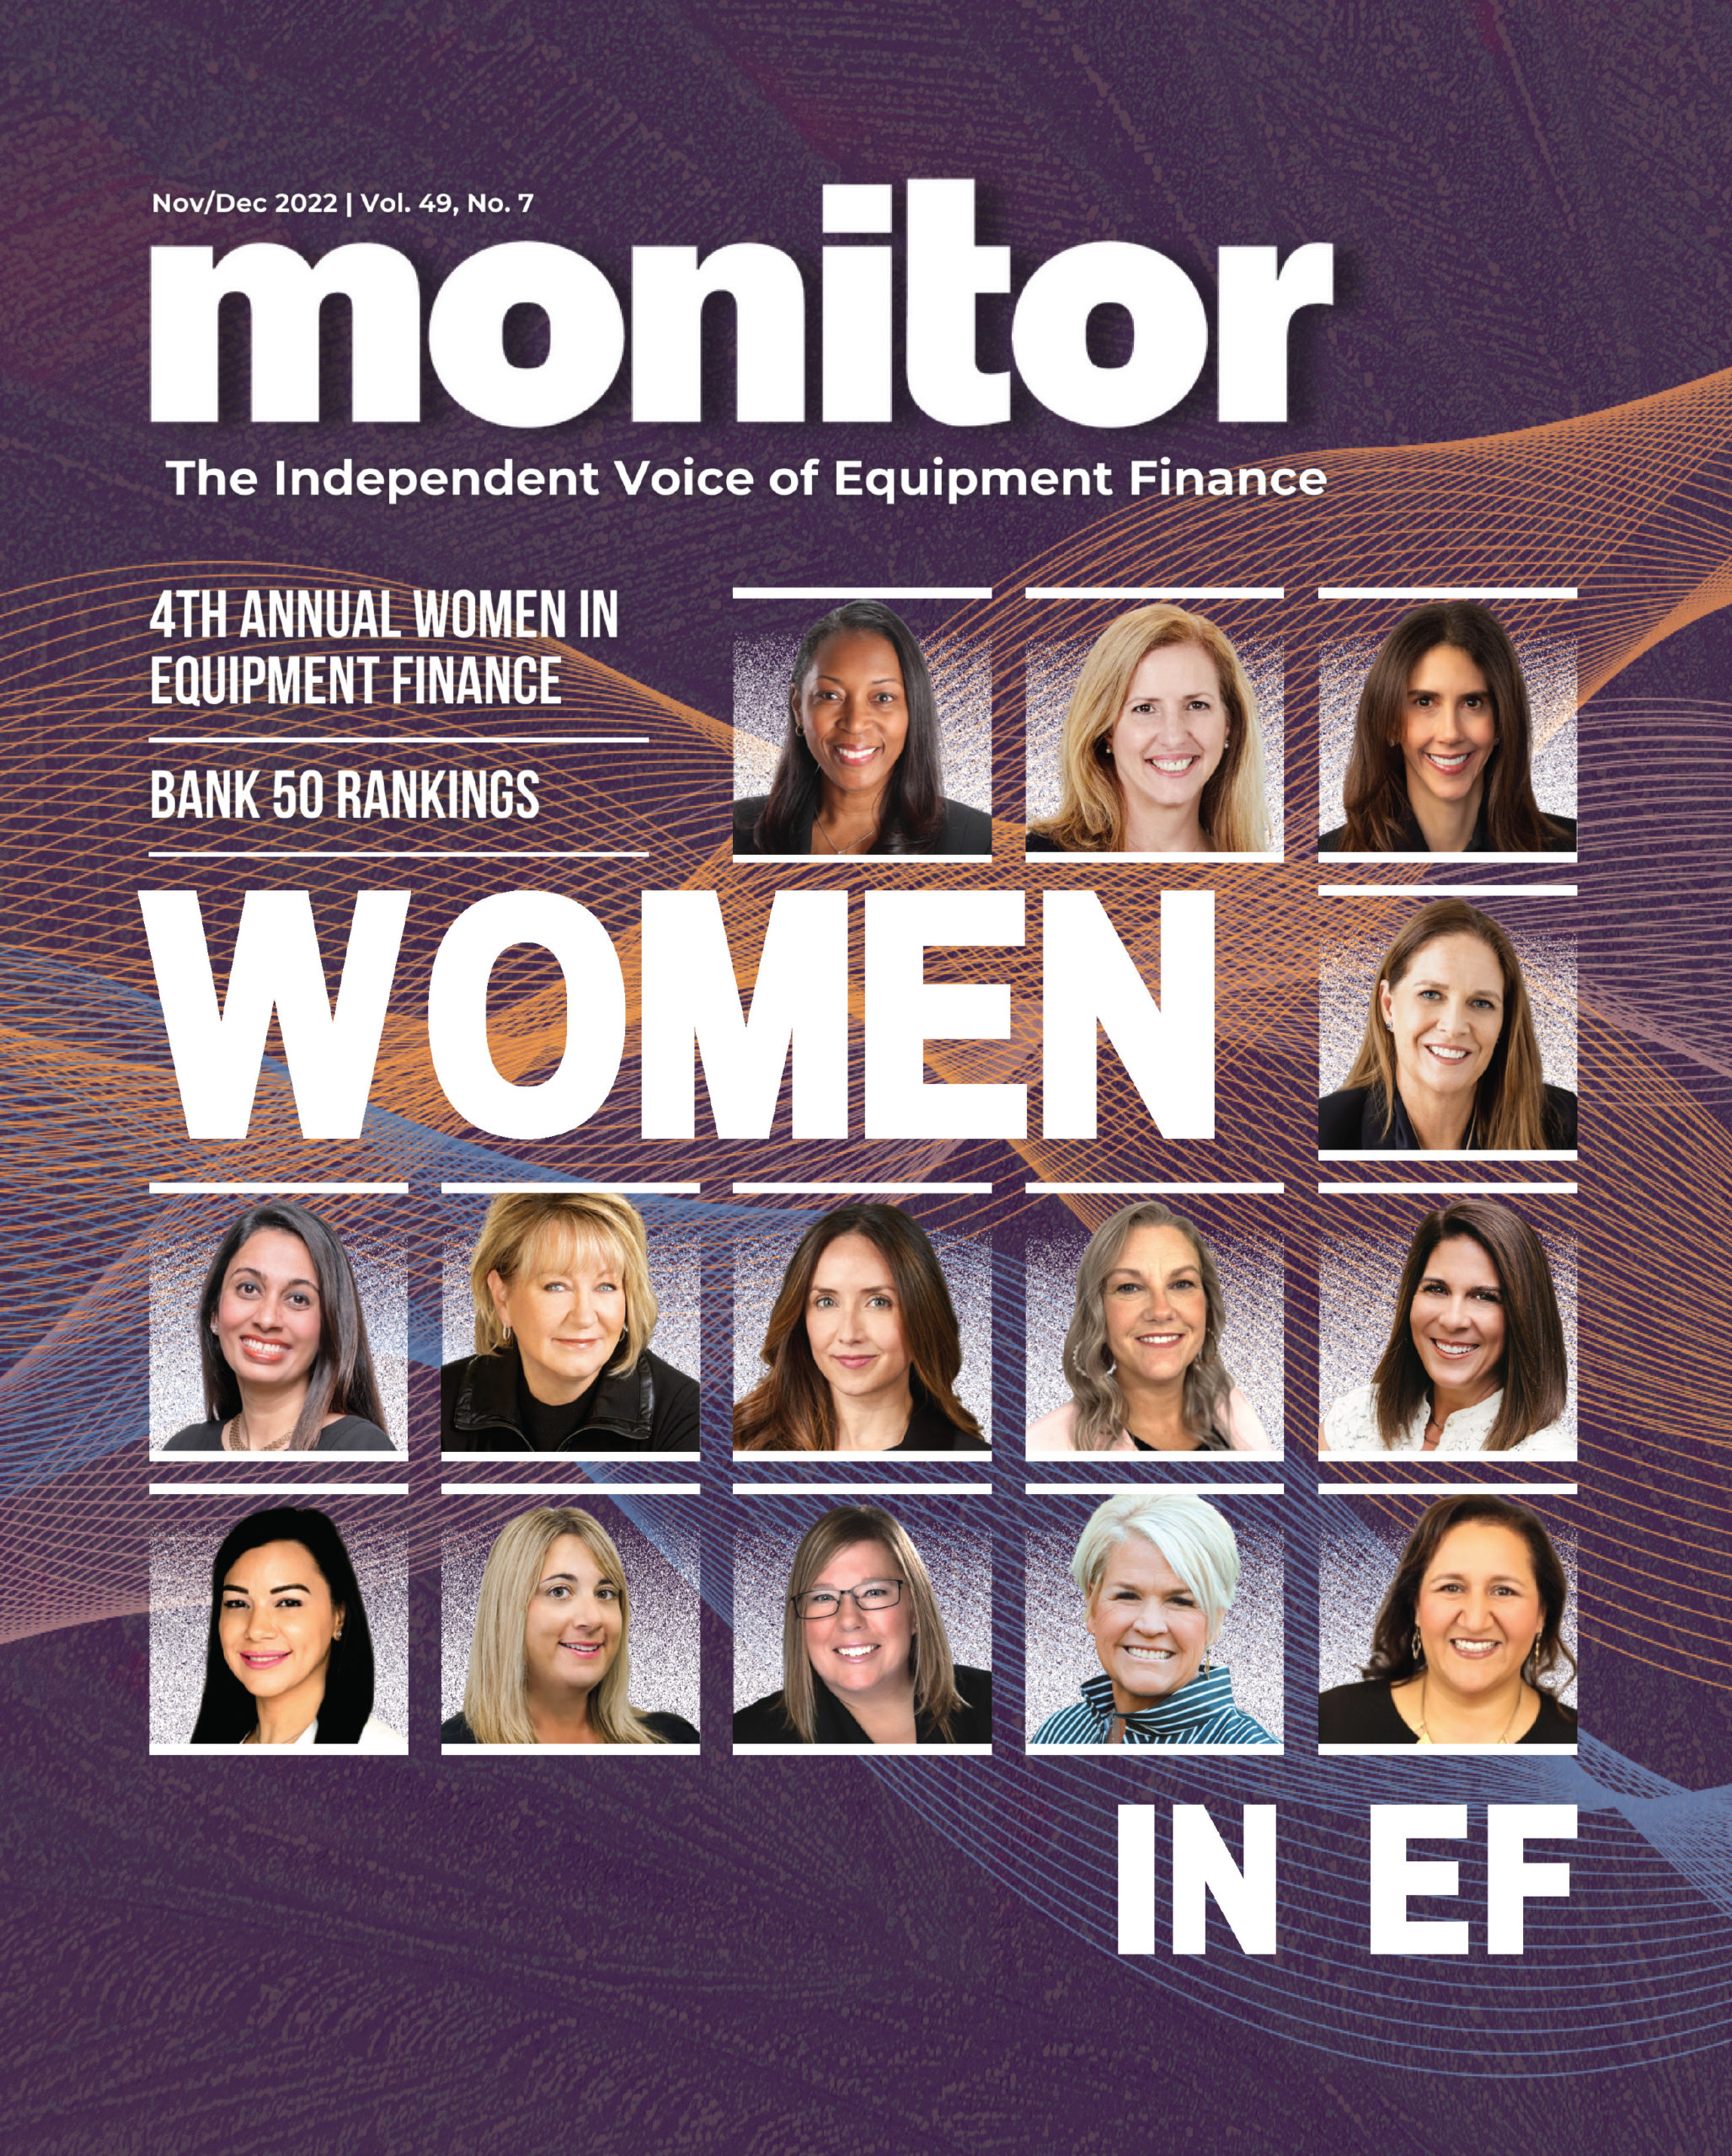 2022 4th Annual Women in Equipment Finance Issue - Monitordaily